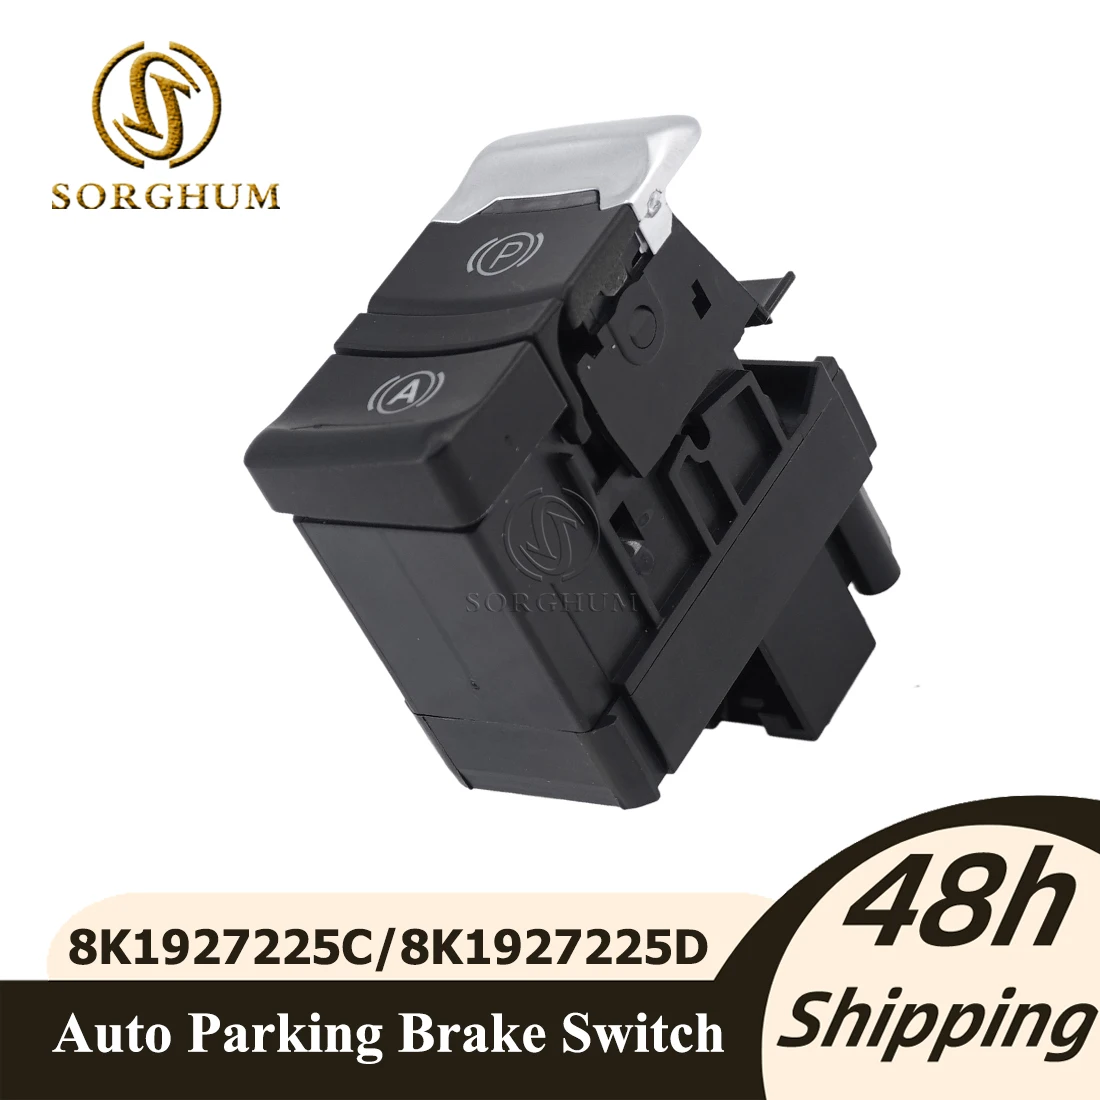 

8K1927225C Electronic Parking Brake Switch Auto Hold Button For Audi A4 S4 B8 Q5 A4 Allroad Quattro A5 S5 2008-2015 8K1927225D